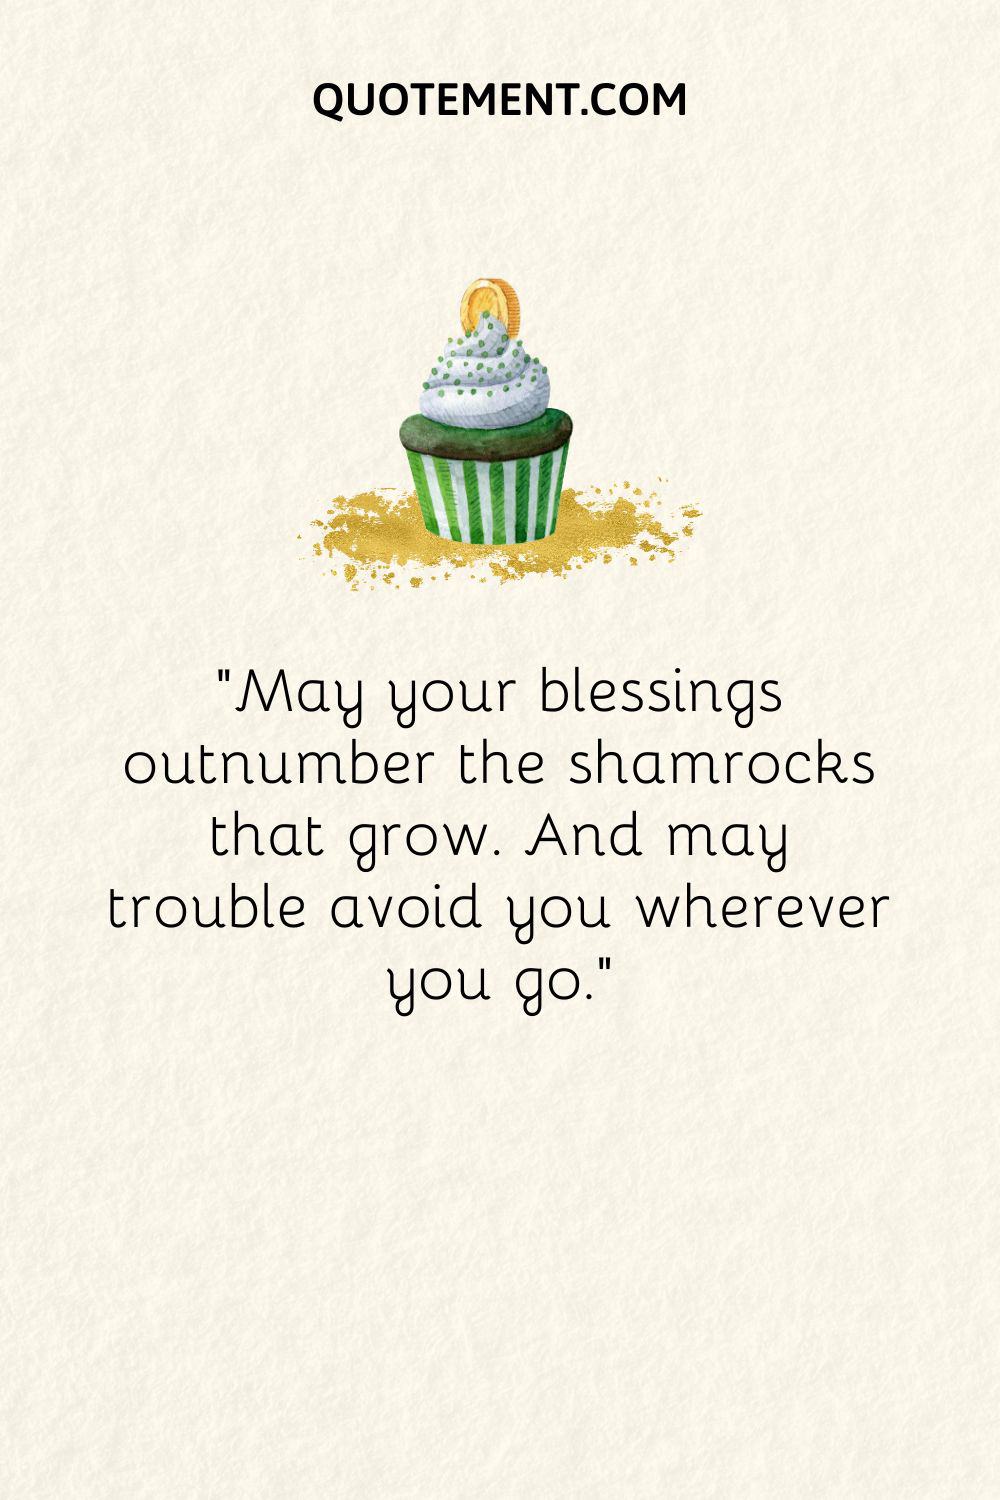 May your blessings outnumber the shamrocks that grow